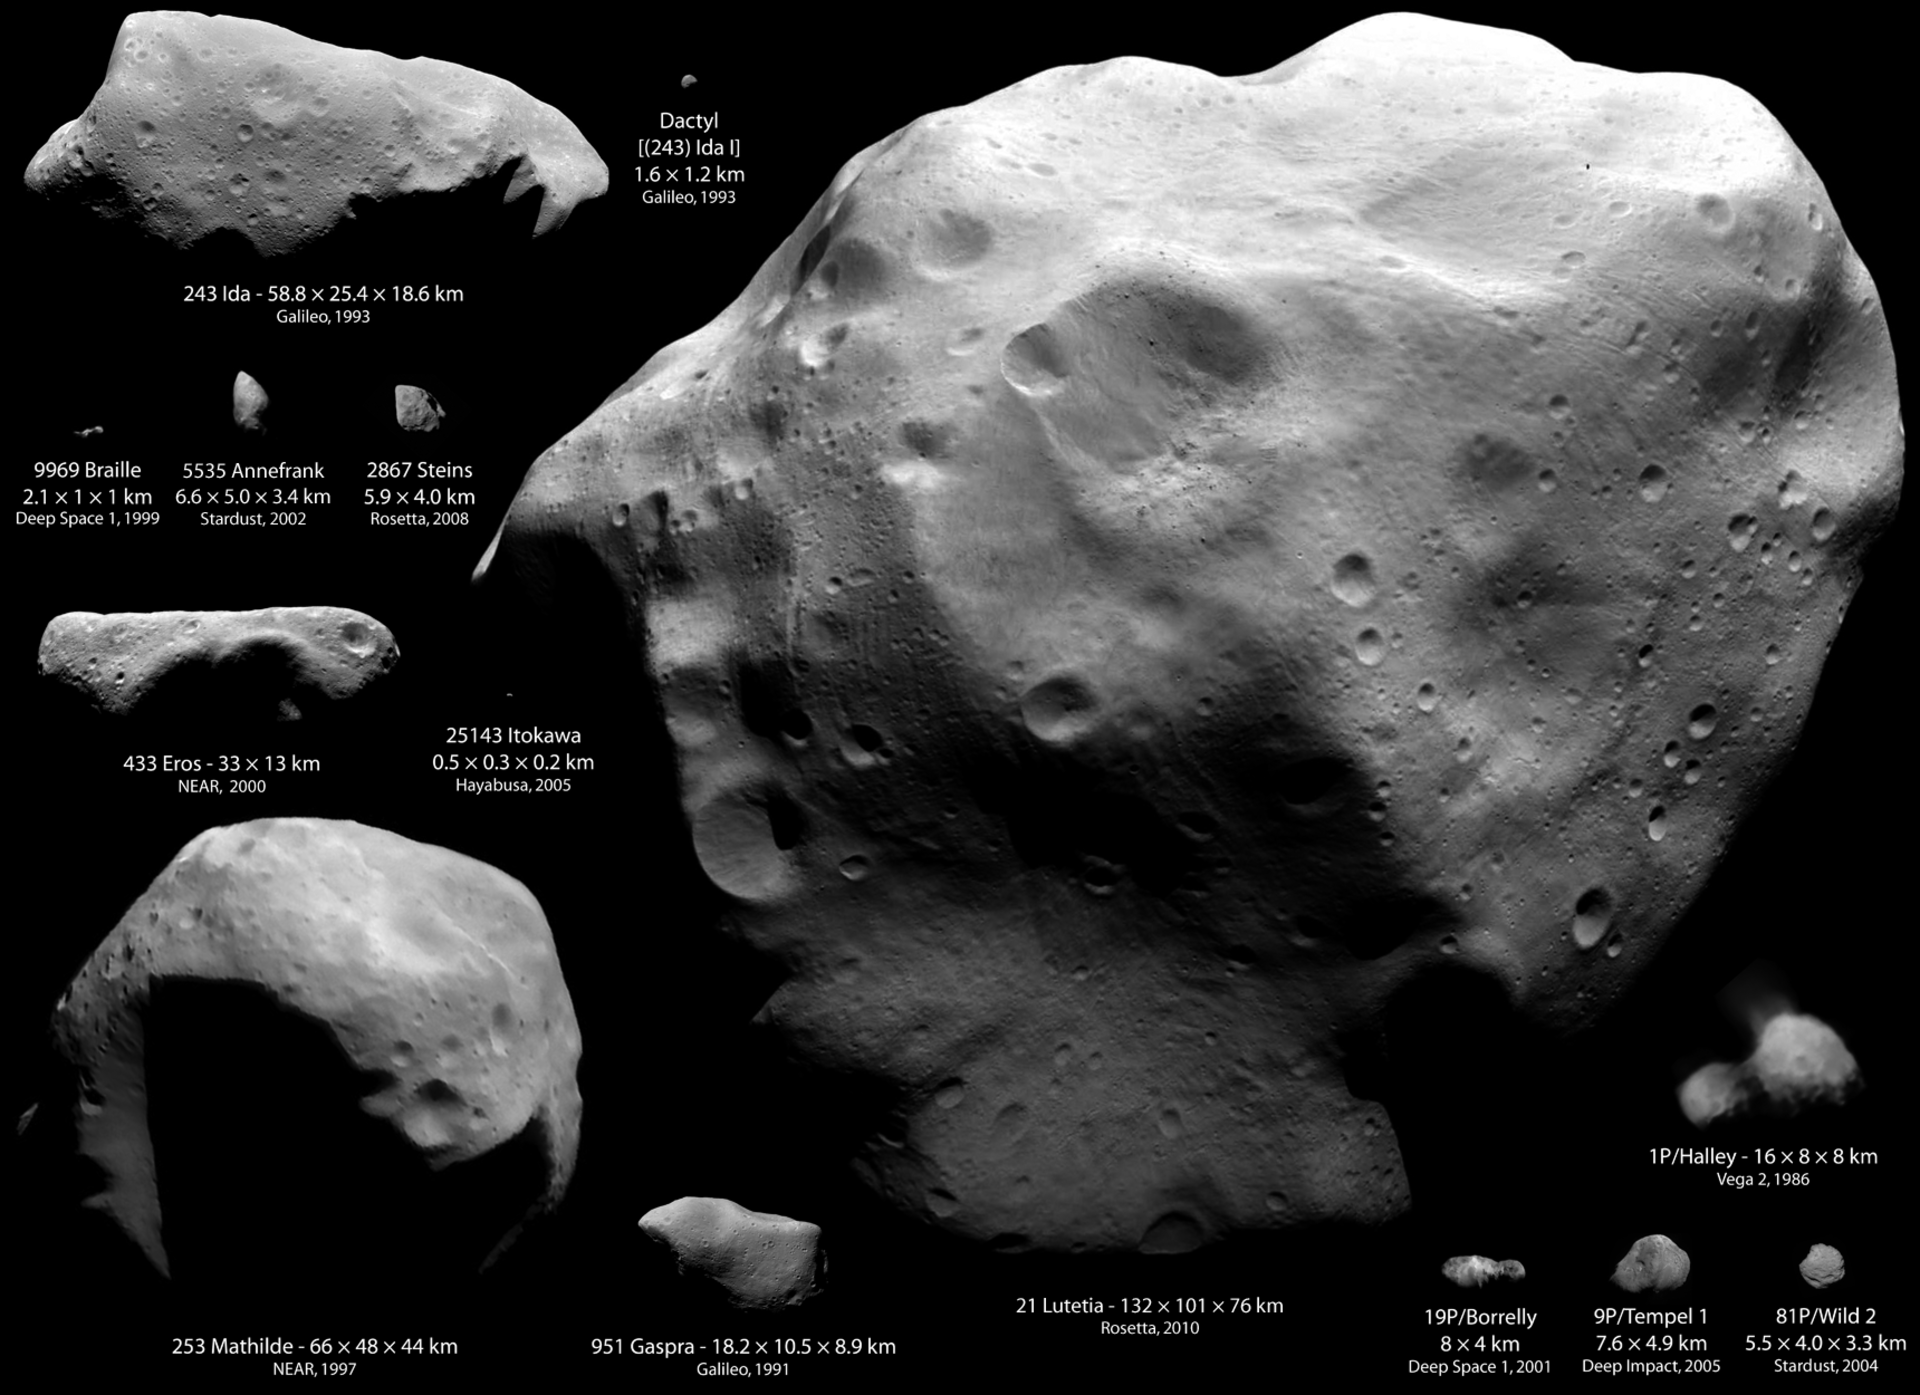 How does Lutetia compare to the other asteroids and comets visited by spacecraft?